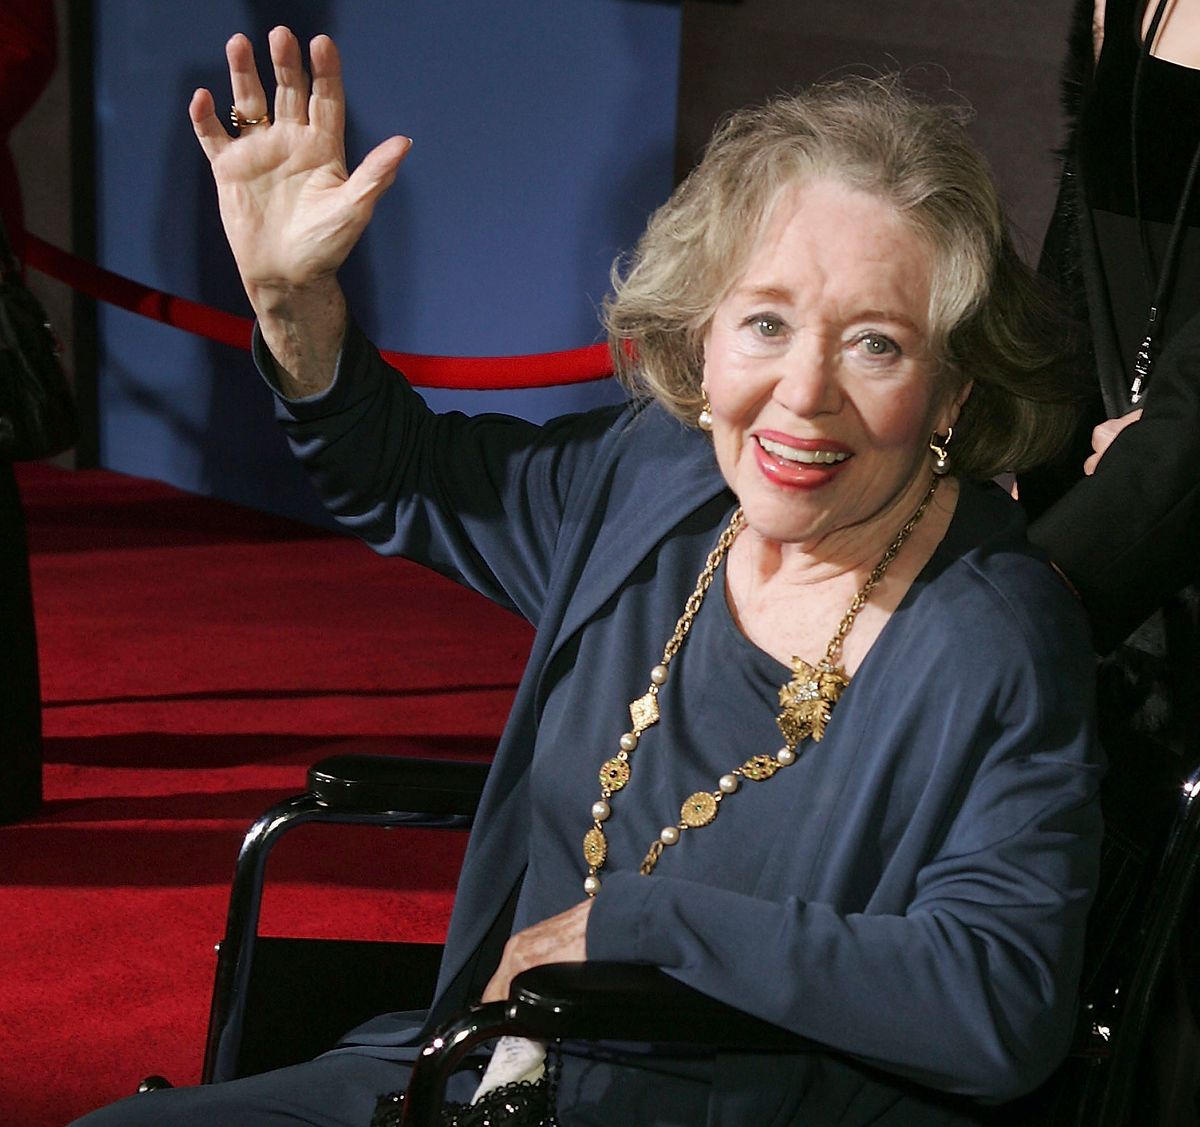 Disney's "Mary Poppins" 40th Anniversary Edition DVD Launch Party - Arrivals
LOS ANGELES - NOVEMBER 30:  Actress Glynis Johns arrives at Disney's "Mary Poppins" 40th Anniversary Edition DVD release party at El Capitan Theater on Novenber 30, 2004 in Los Angeles, California. (Photo by Kevin Winter/Getty Images)